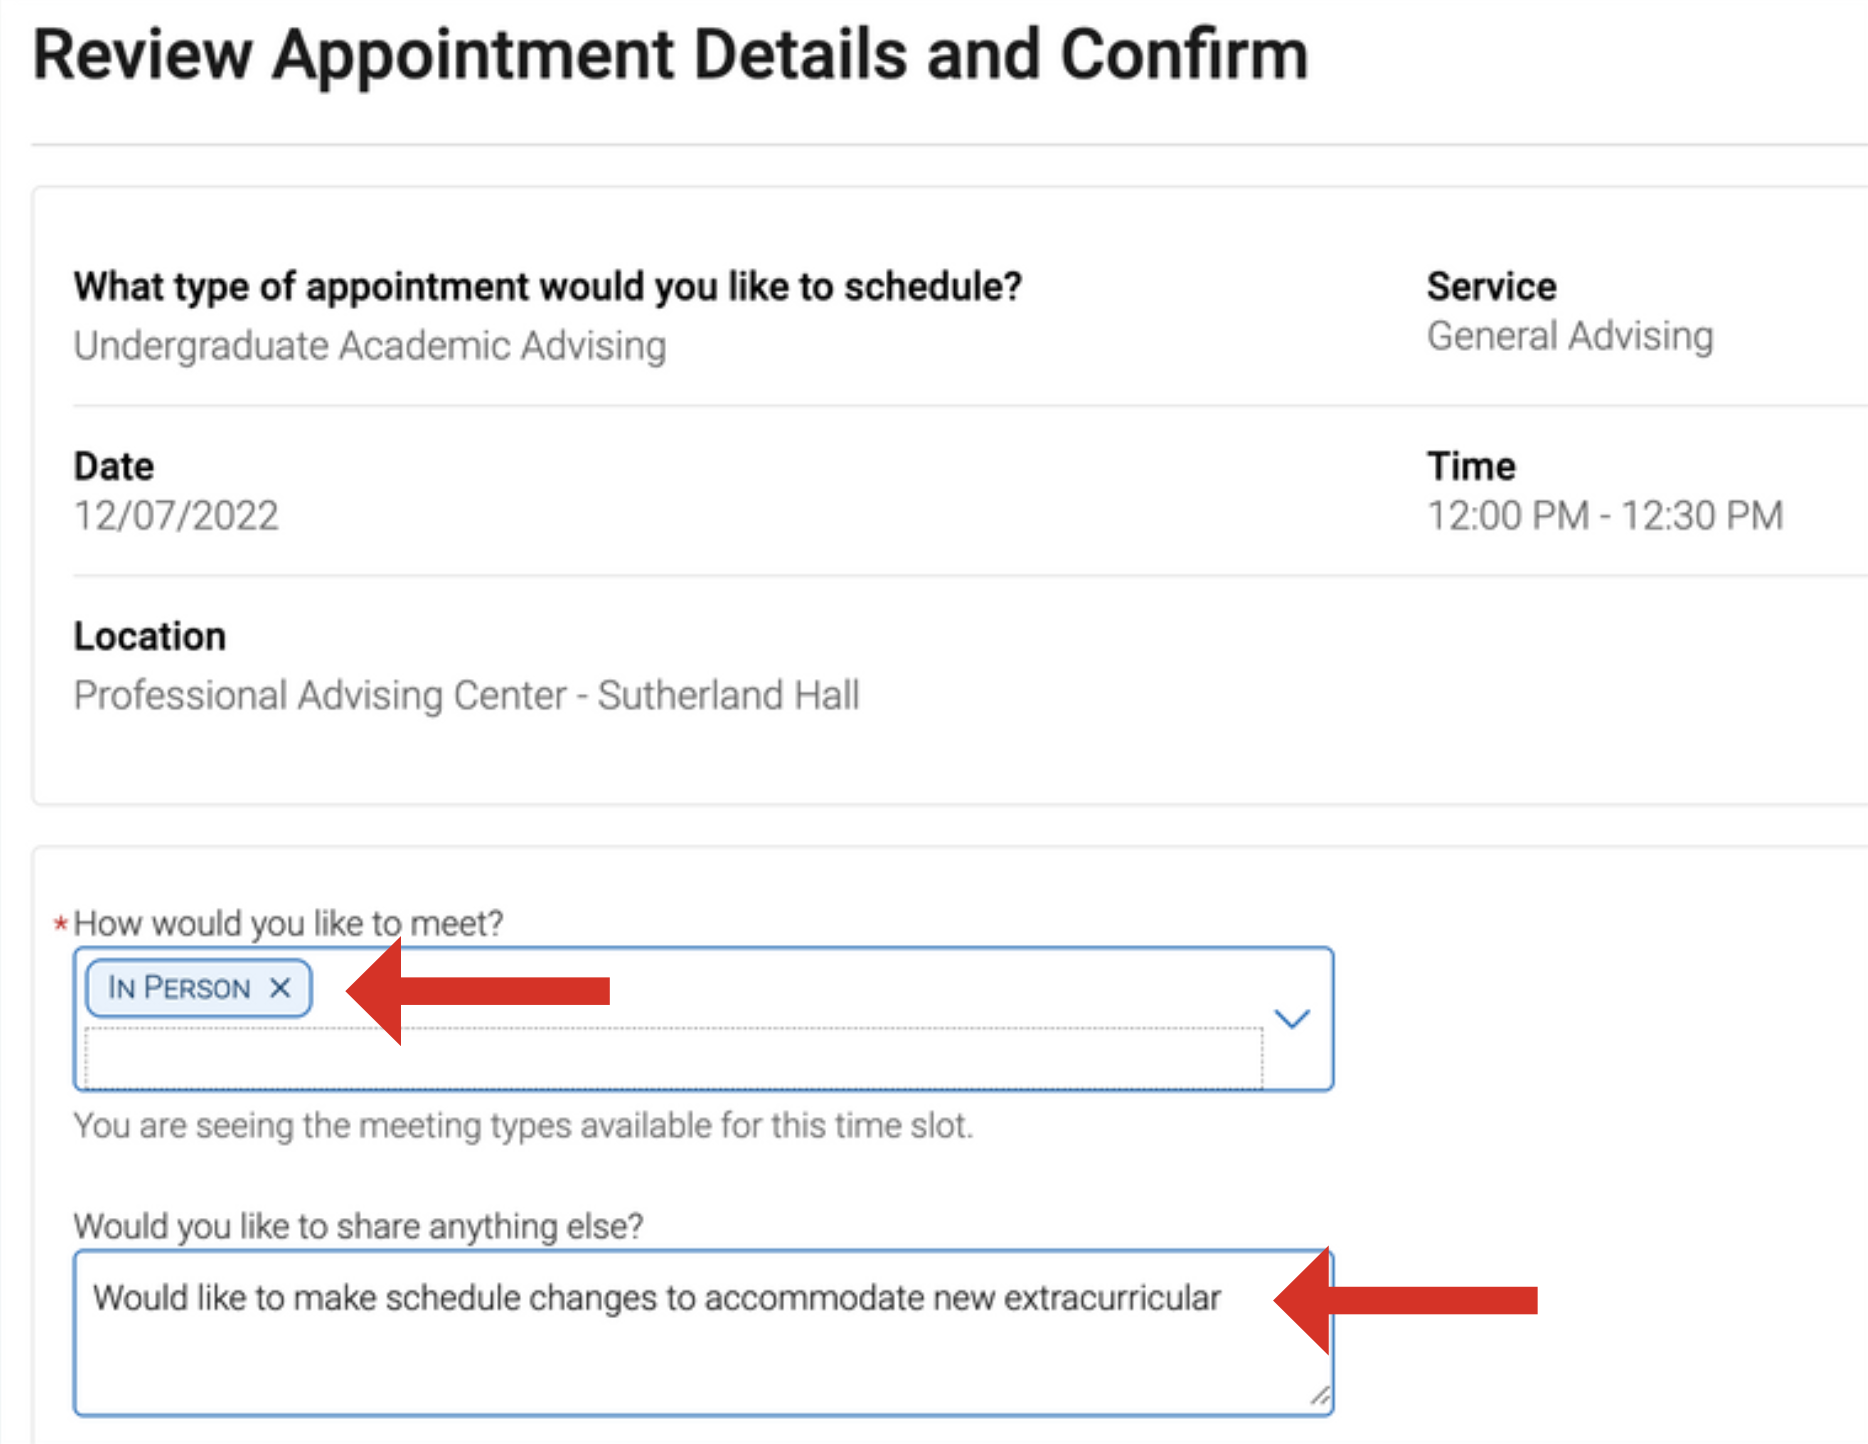 Screenshot of appointment details and confirmation